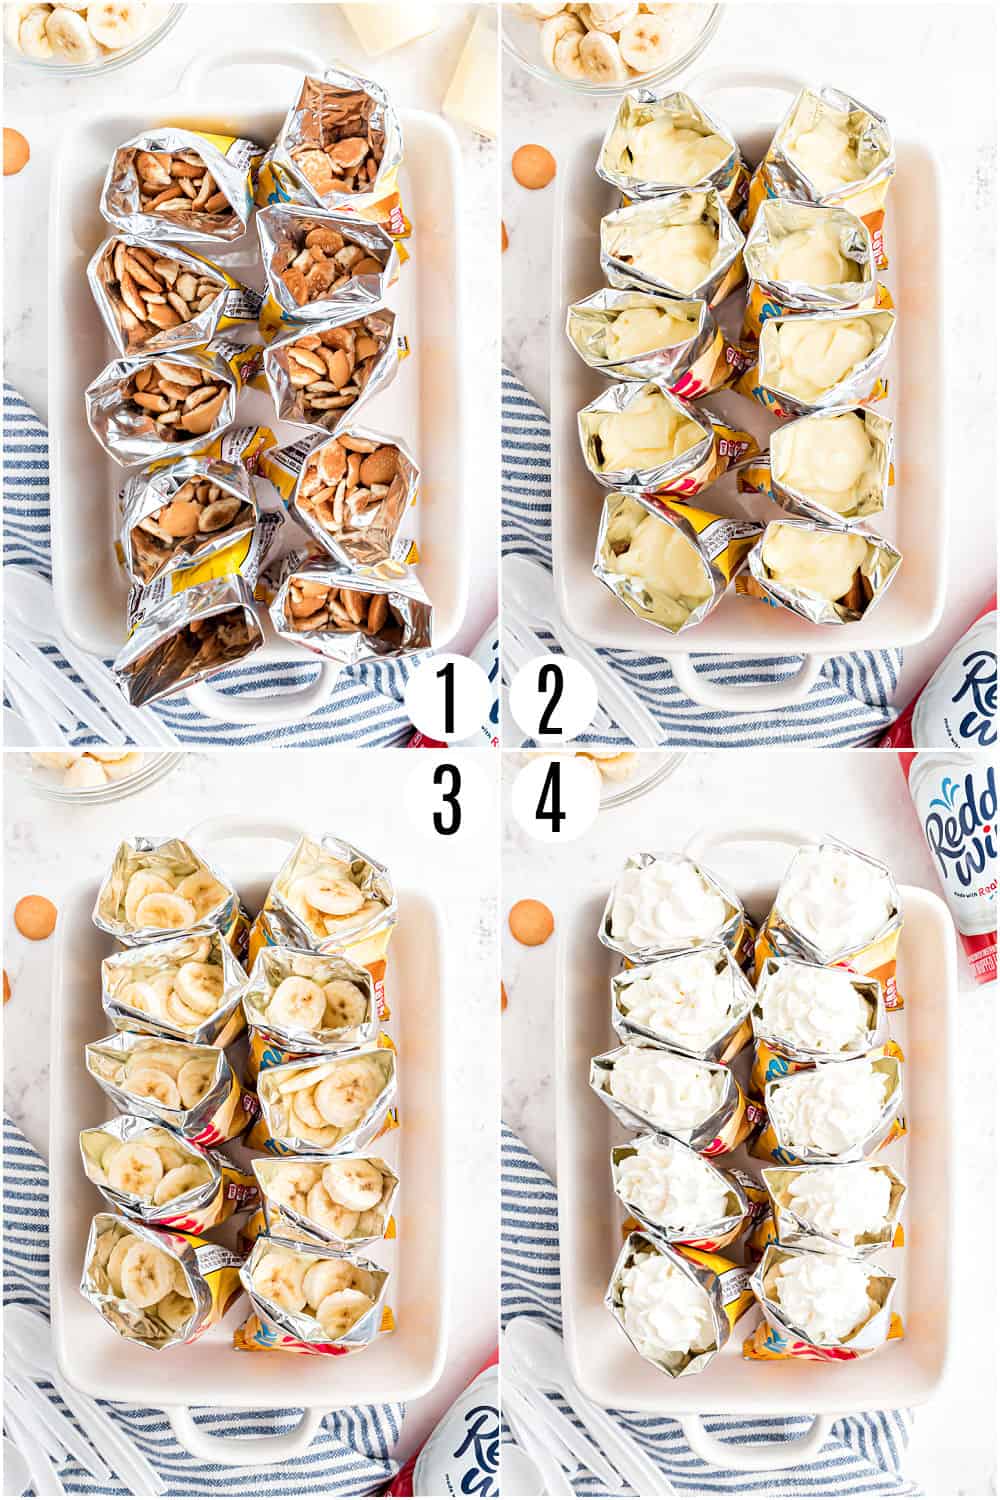 Step by step photos showing how to make banana pudding walking desserts.